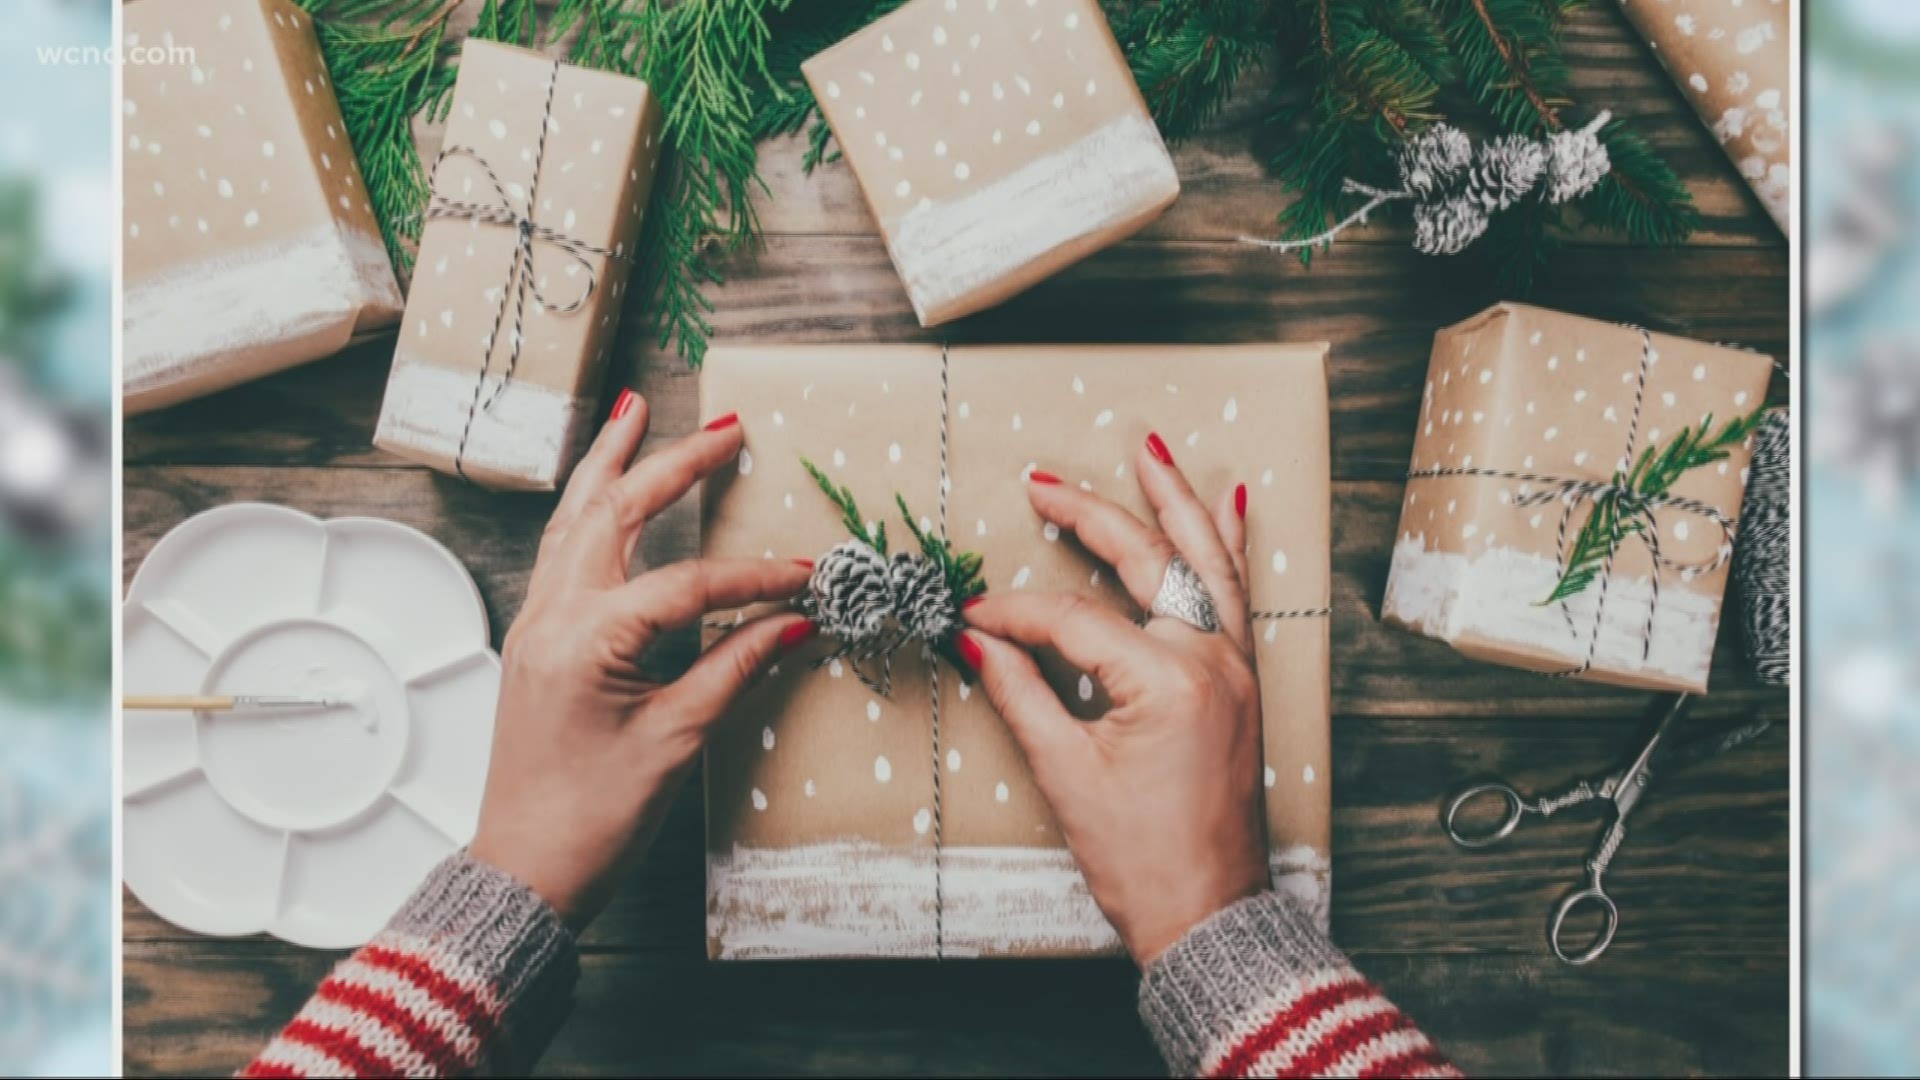 Parents say the four gift rule is the secret to a successful holiday season and teaches kids they don't need a bunch of meaningless presents.